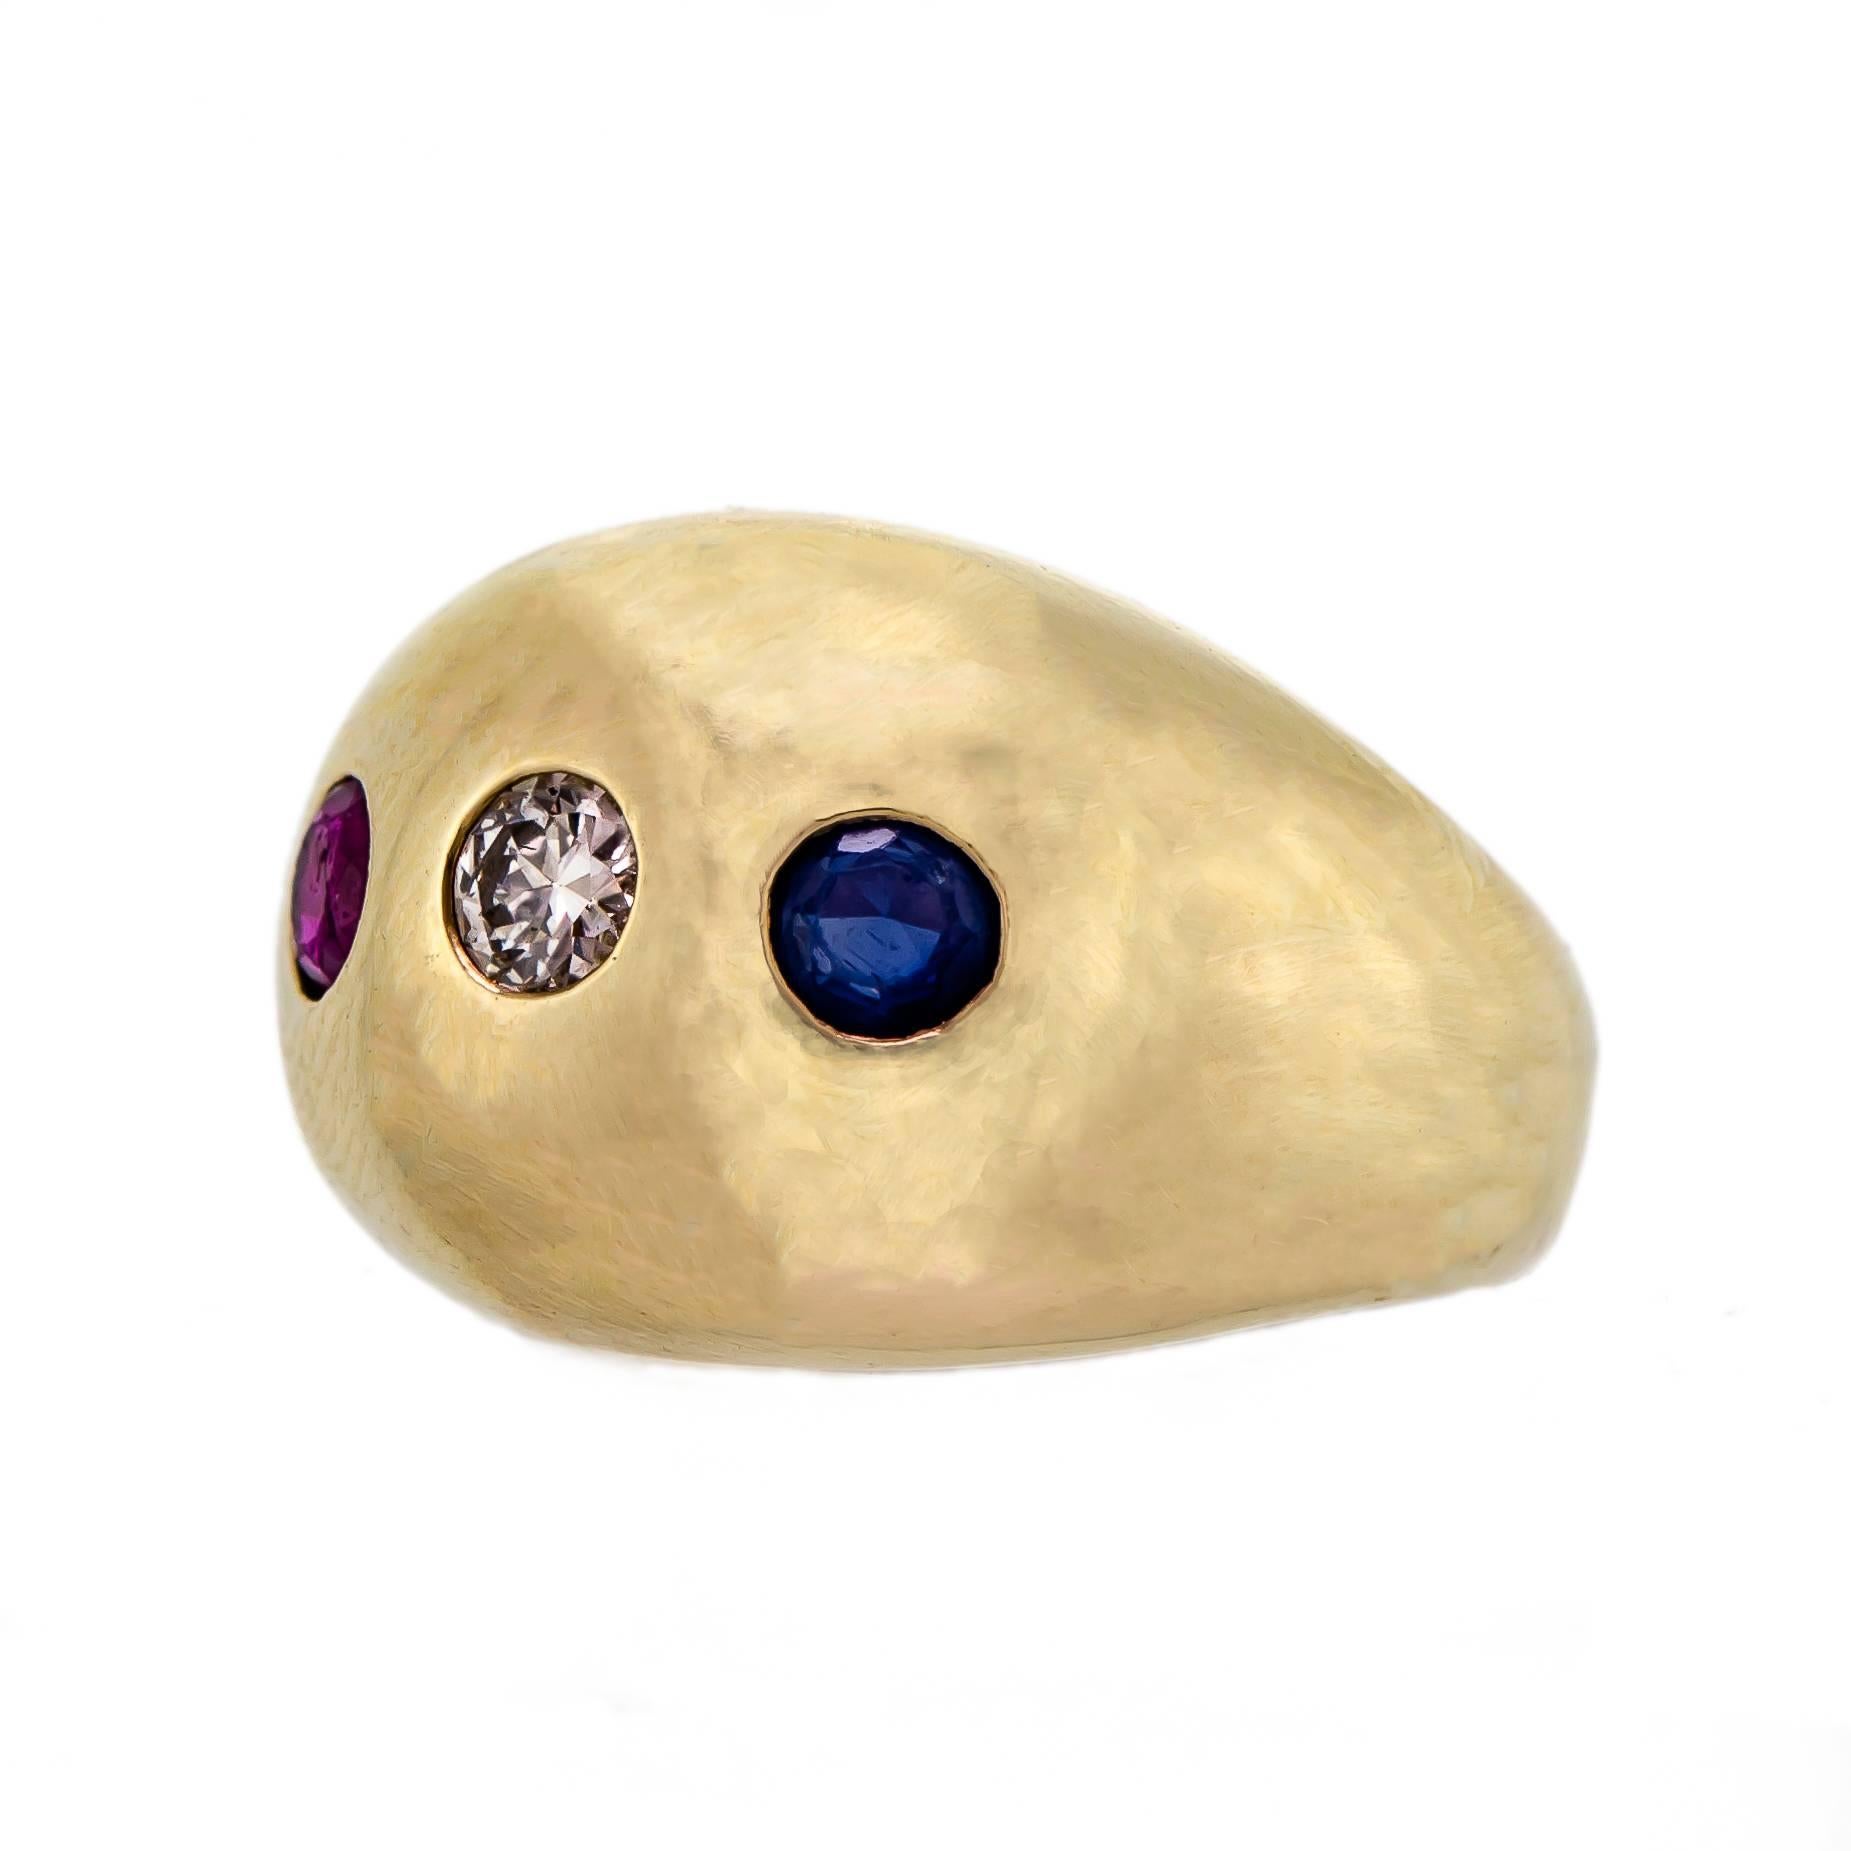 Fantastic Circa 1940 Retro 14kt yellow gold and gemstone red white and blue (Very Patriotic!) dome ring set with one natural brilliant cut diamond approx .20 ct. and one brilliant cut synthetic sapphire and one brilliant cut synthetic ruby